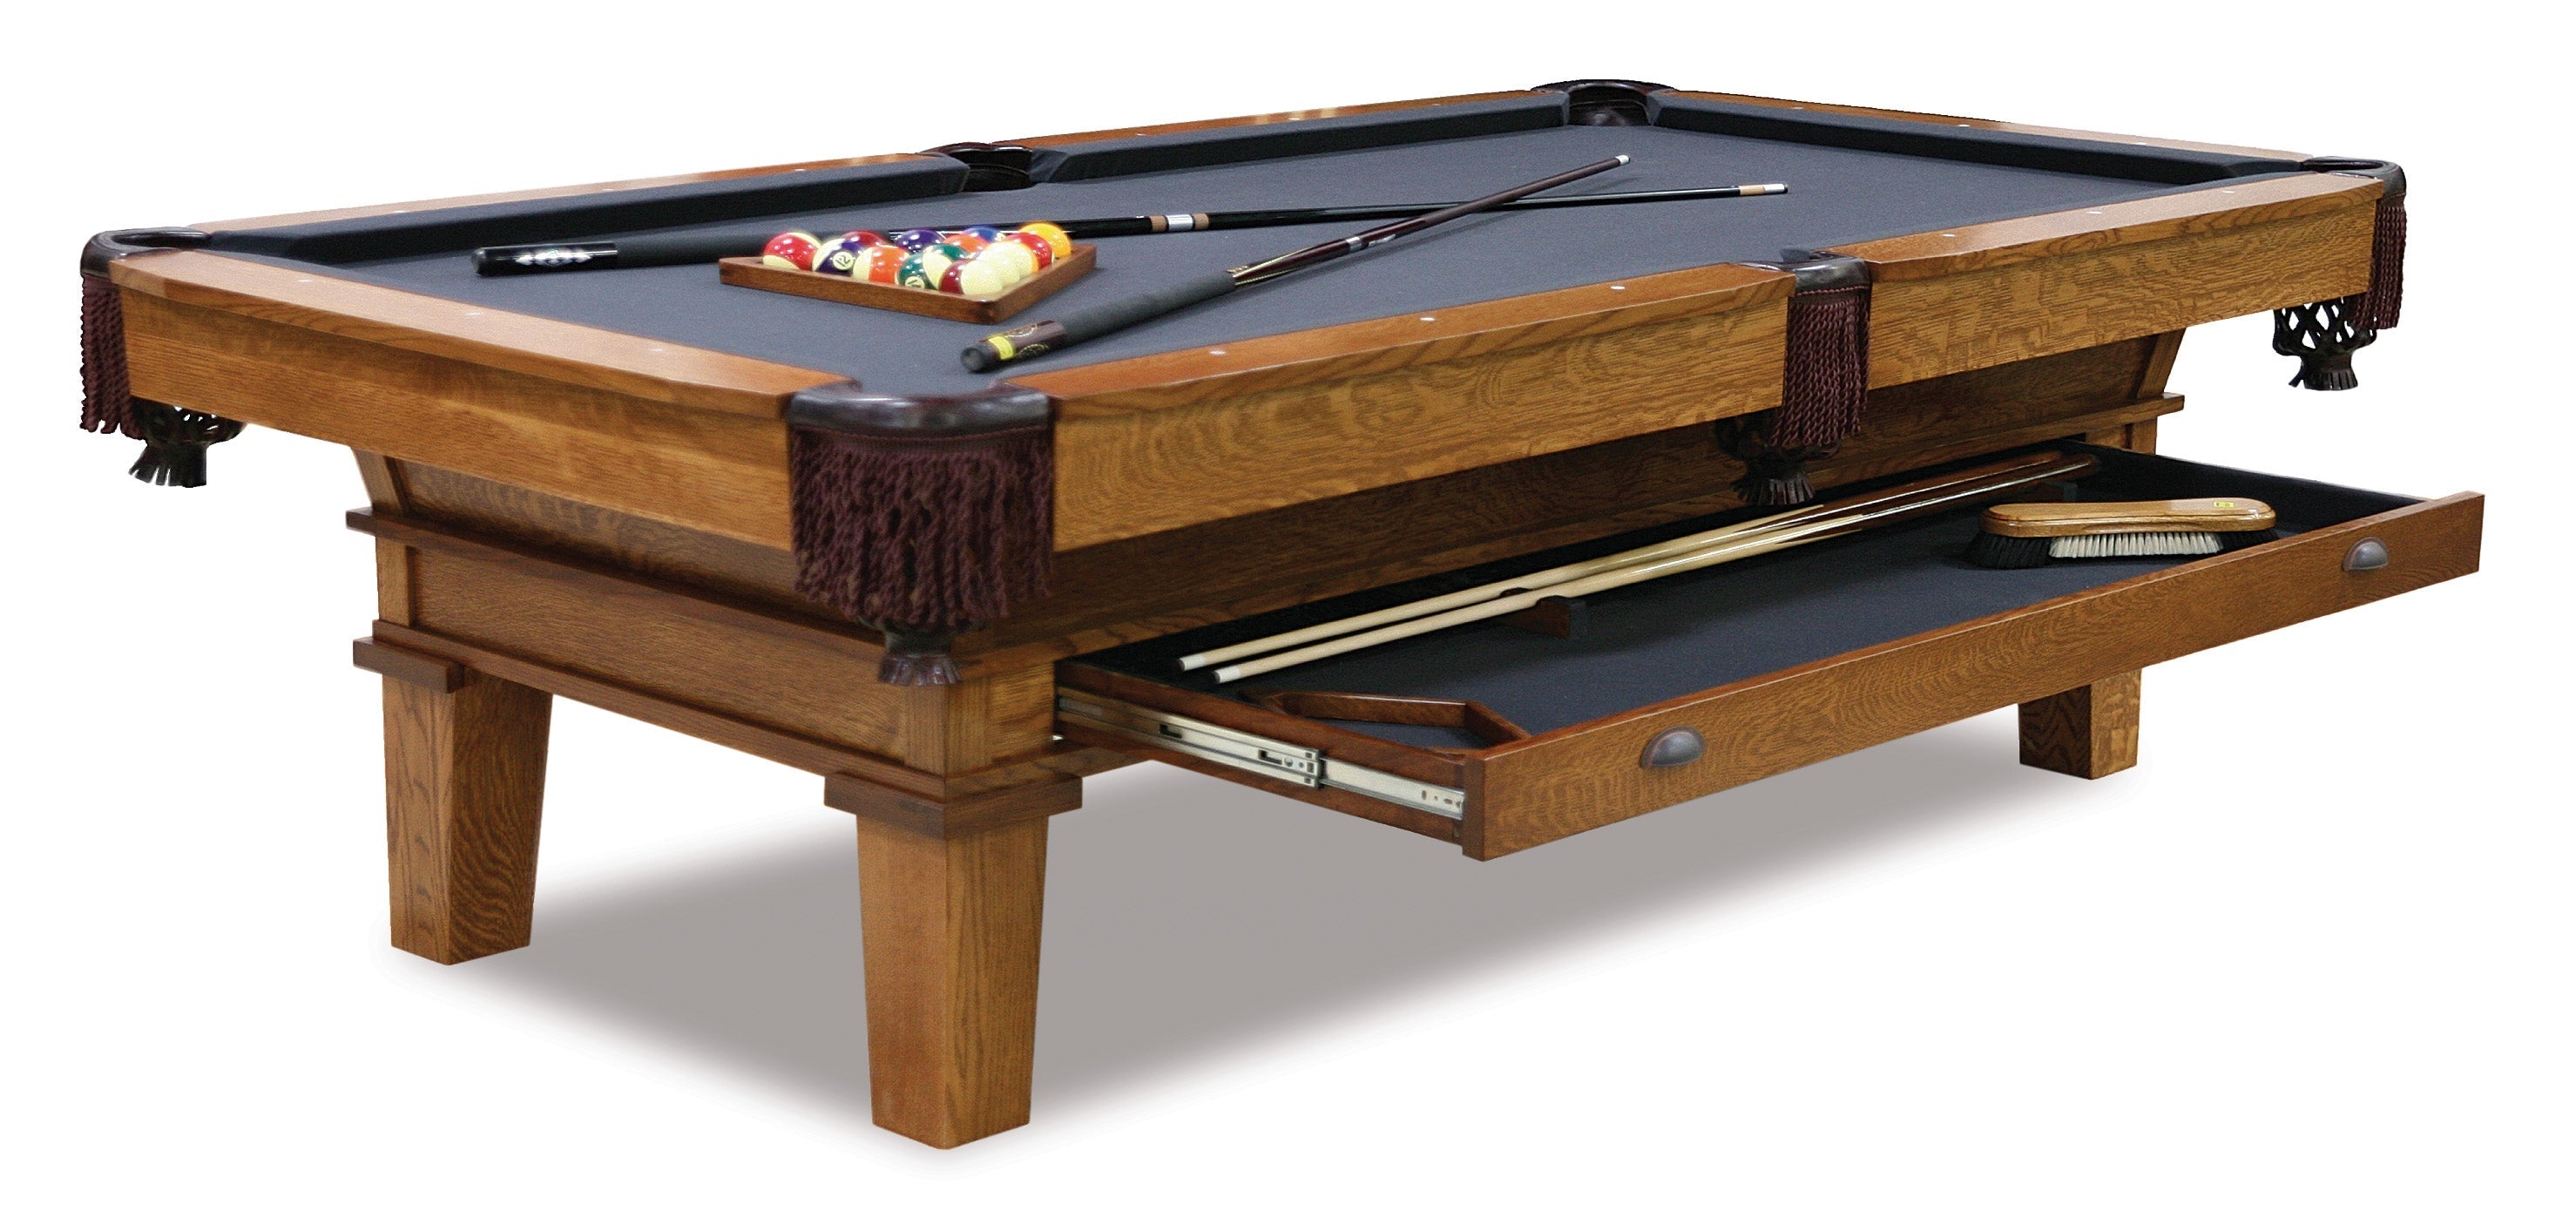 8' Hand-crafted Monroe Pool Table (Brown Maple)